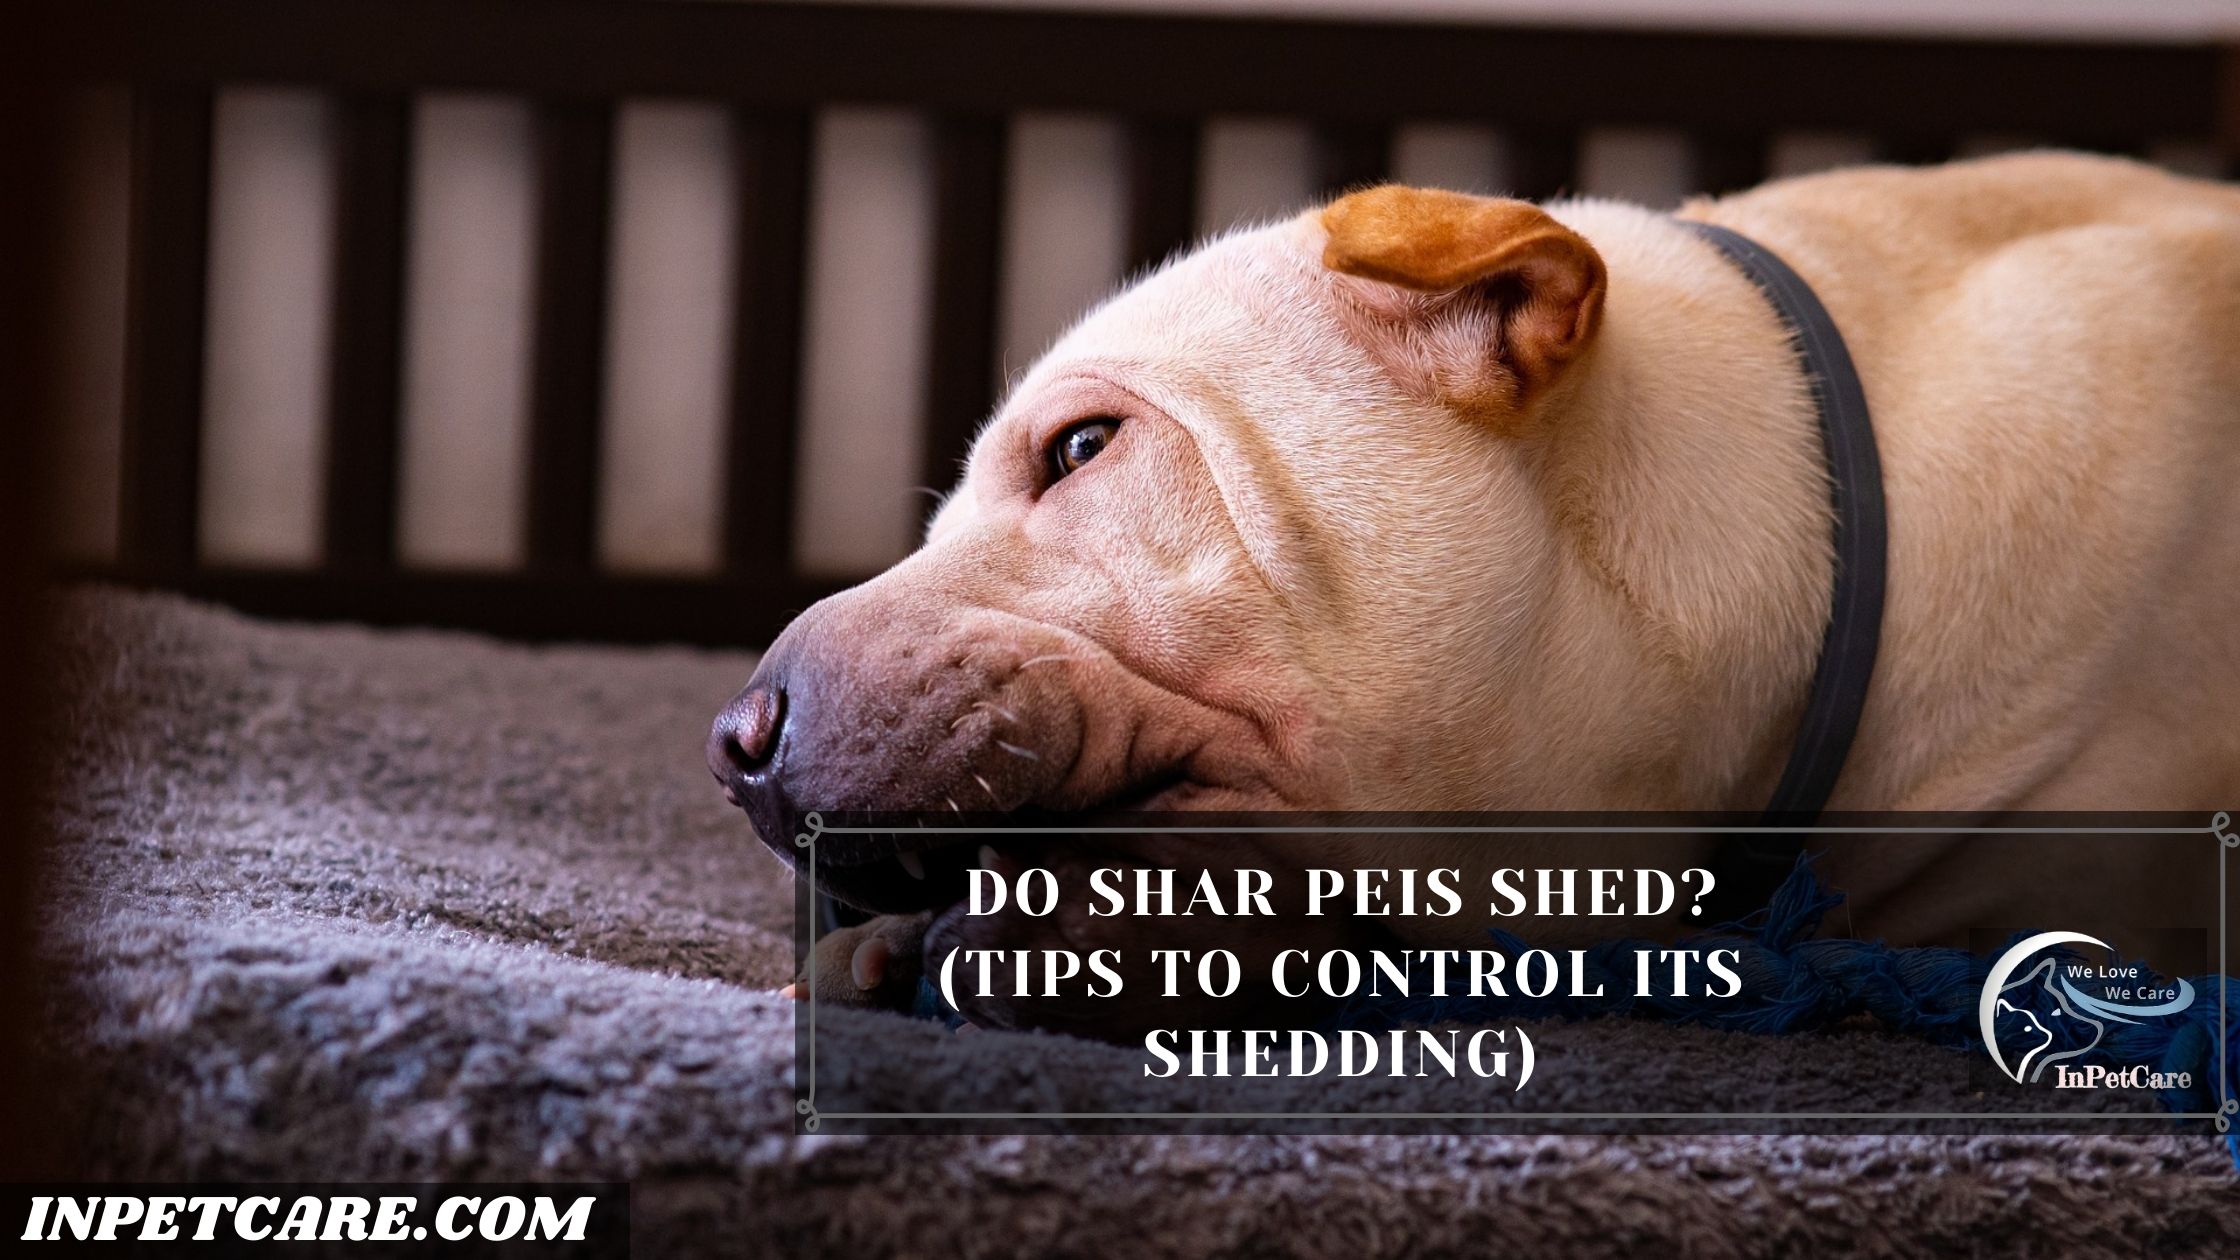 Do Shar Peis Shed? (Tips To Control Its Shedding)